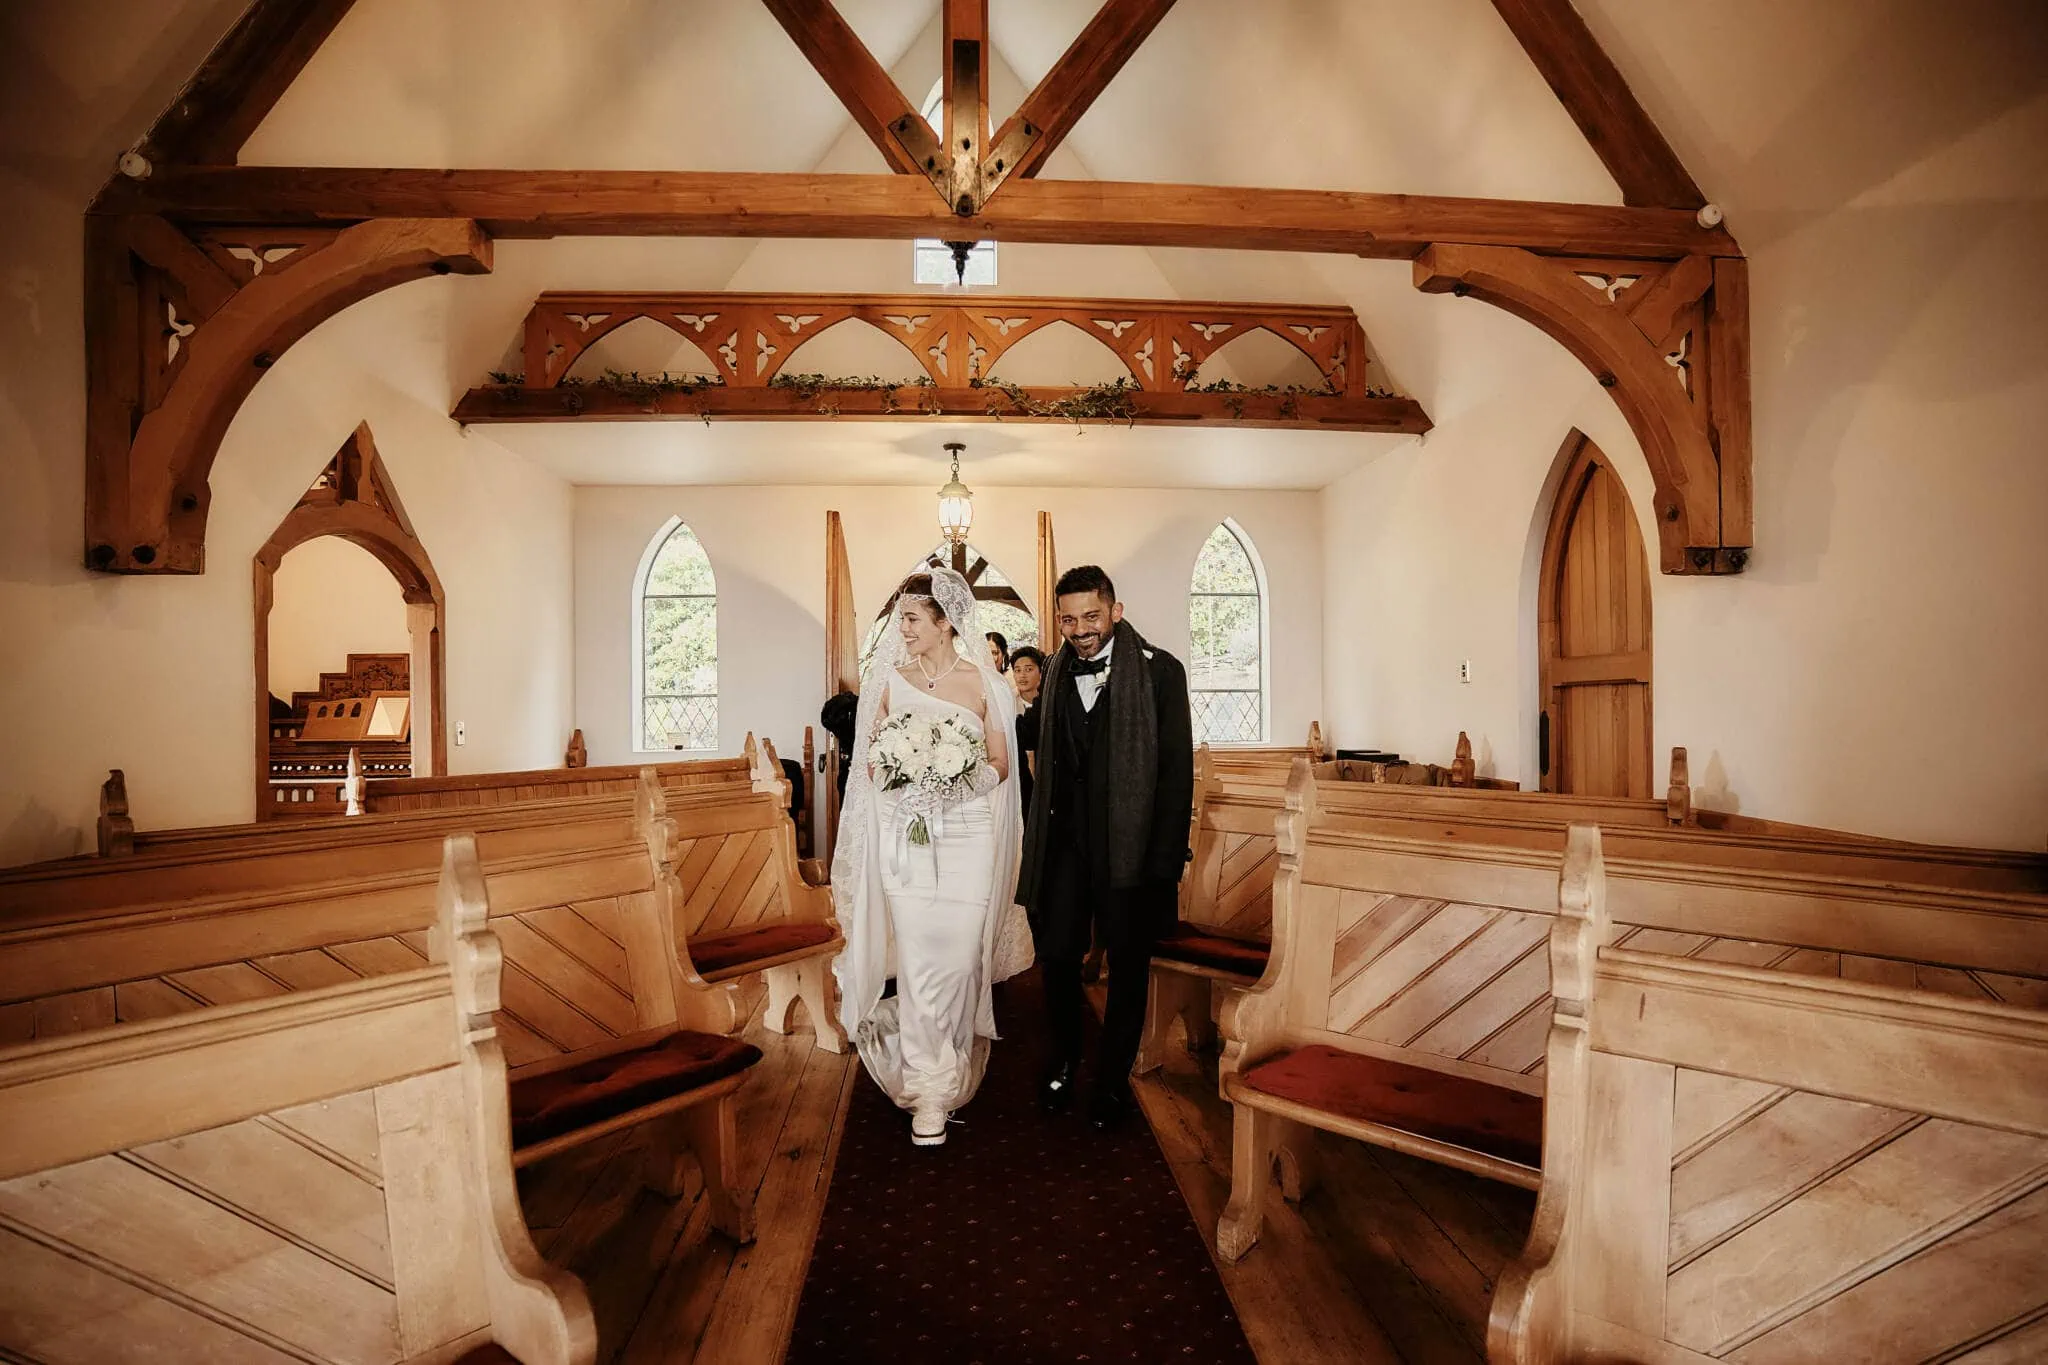 Queenstown New Zealand Elopement Wedding Photographer - Wasim and Yumn's Queenstown Islamic Wedding: A bride and groom walking down the aisle of a church.